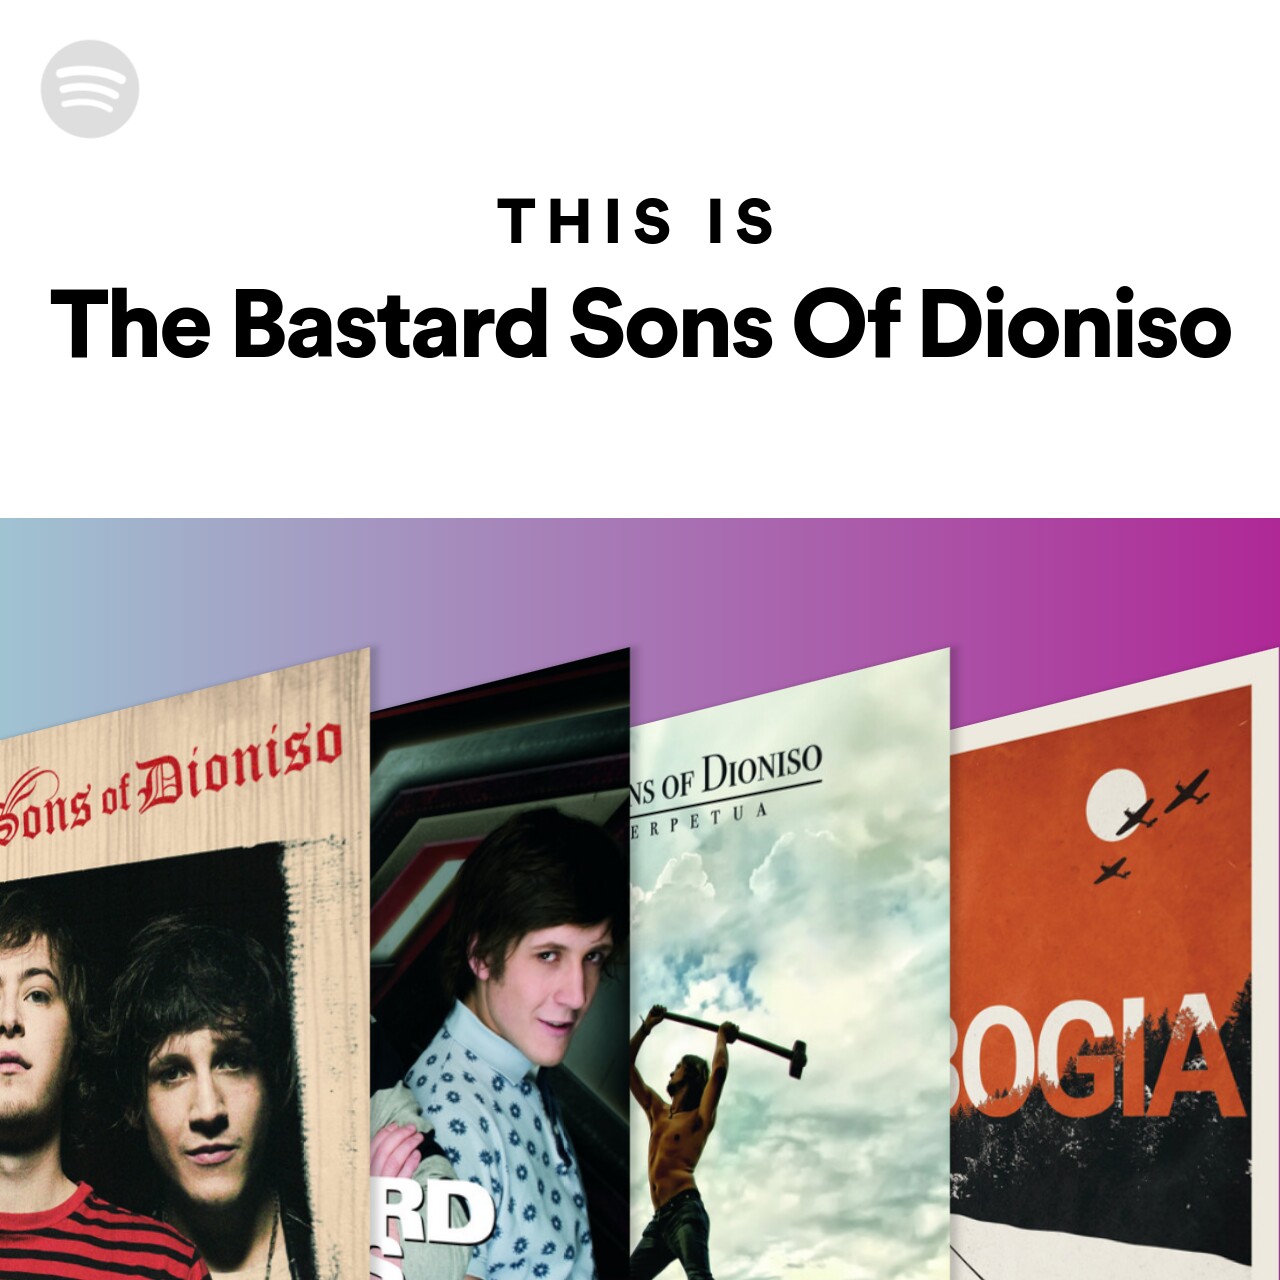 This Is The Bastard Sons Of Dioniso